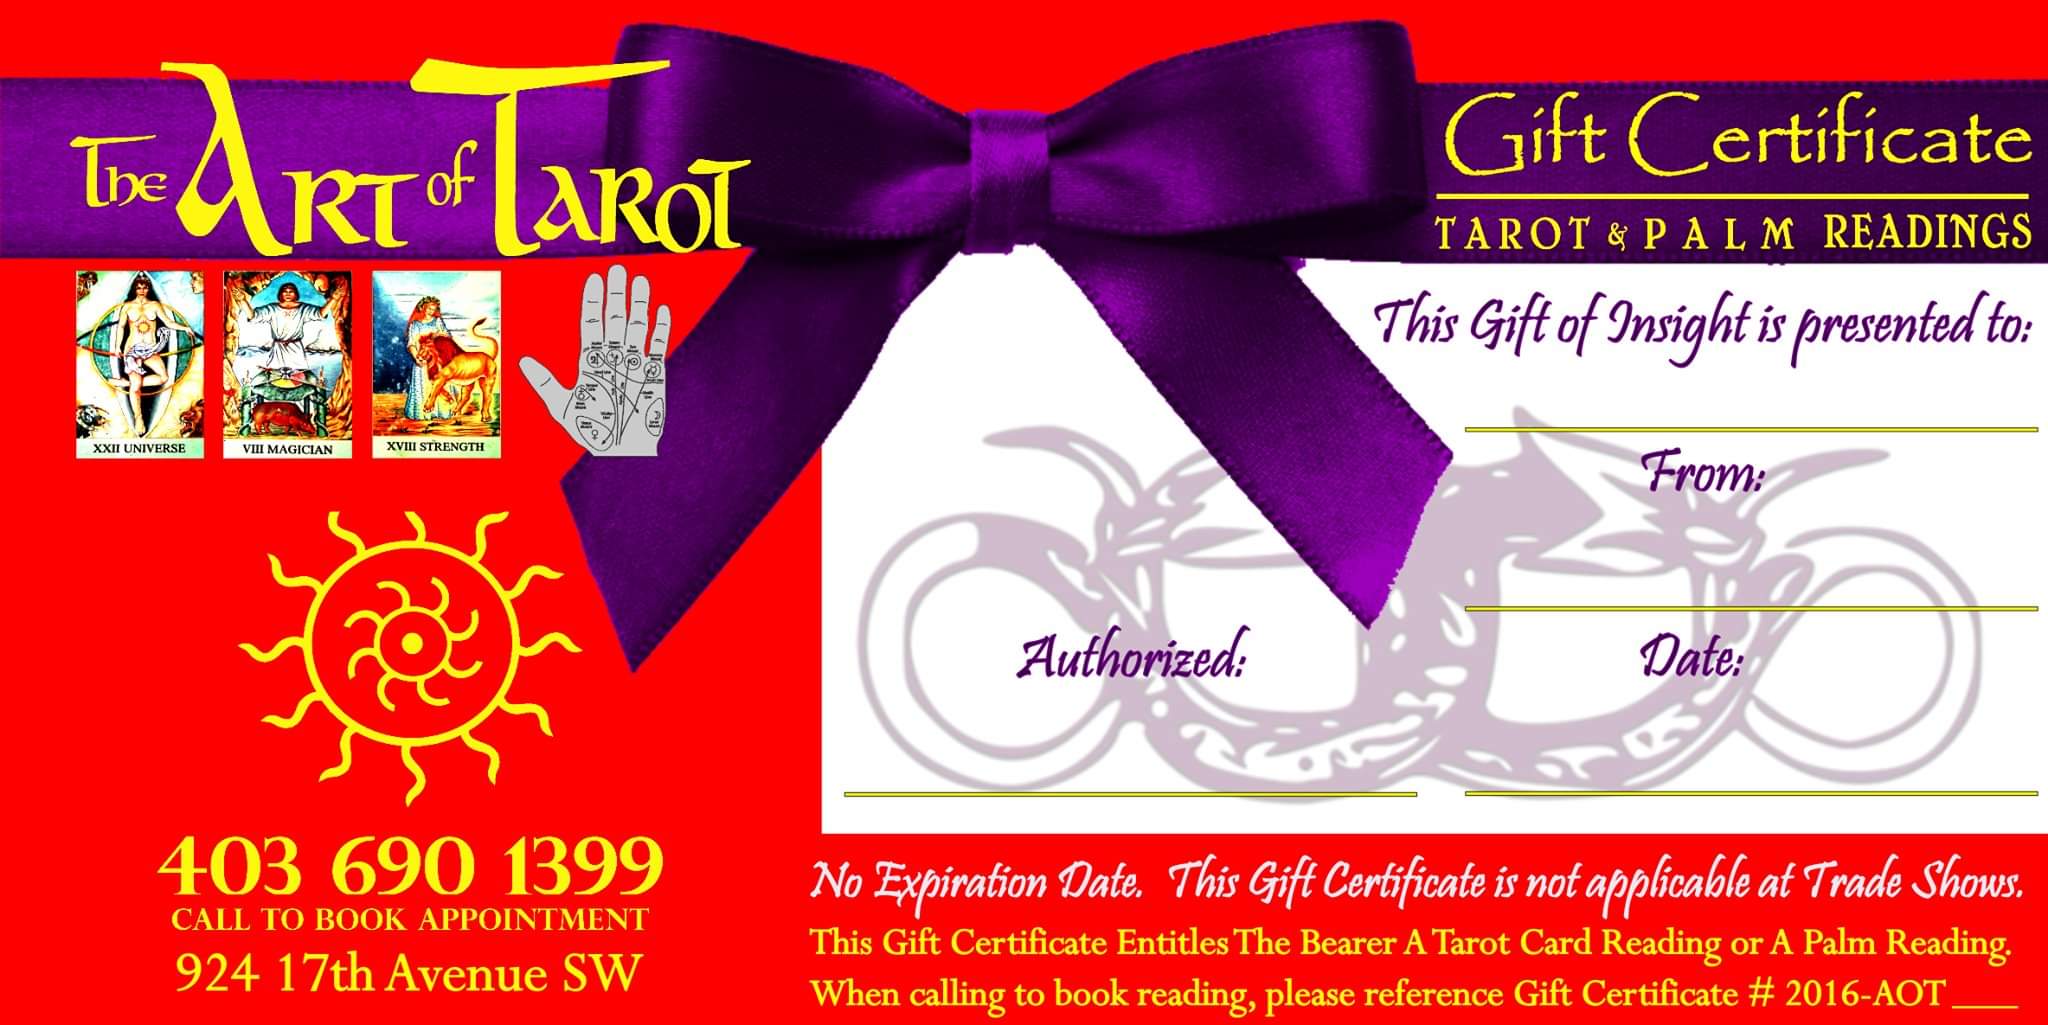 Art of Tarot Gift Certificates Blank Template - Imgflip With Regard To This Certificate Entitles The Bearer To Template